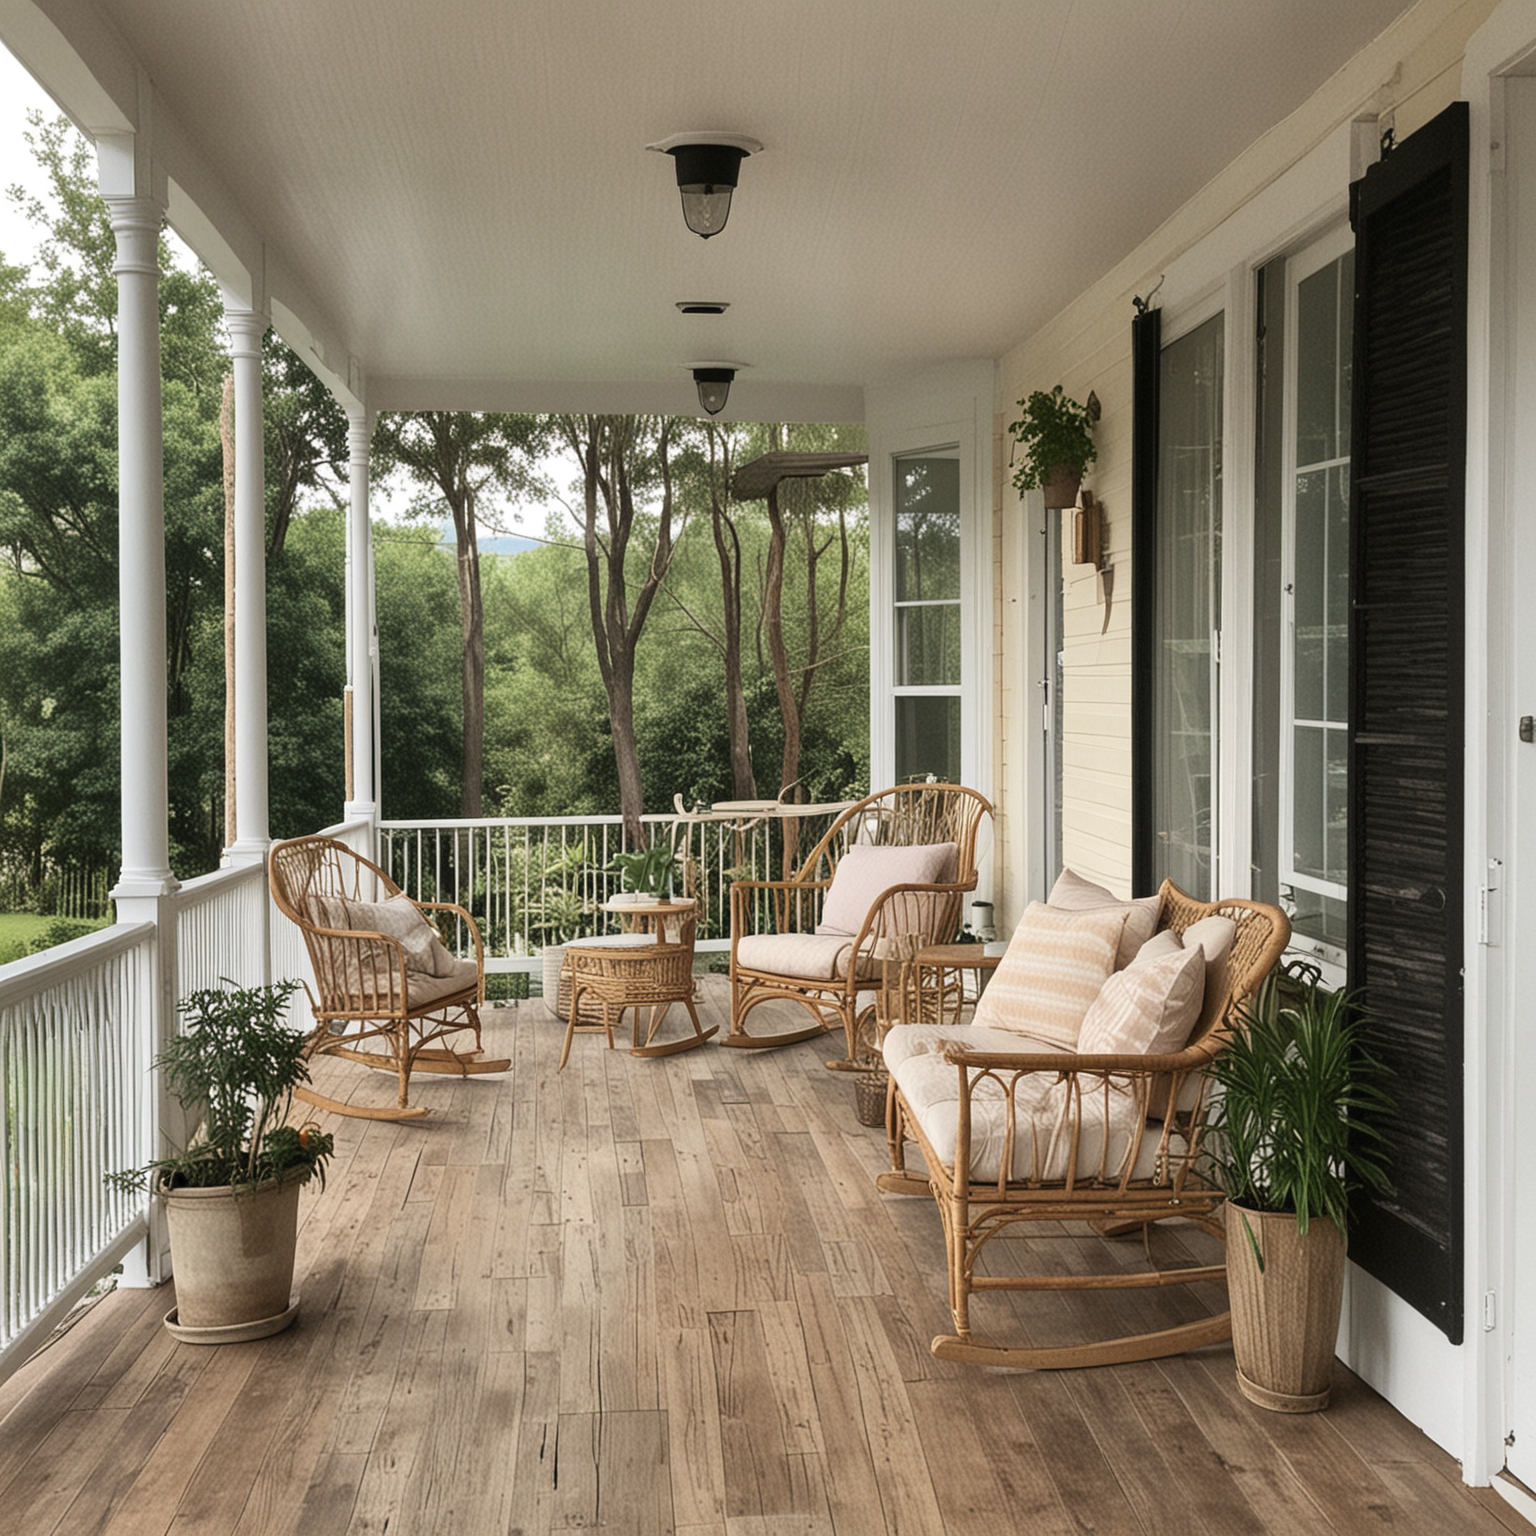 Tranquil Porch with Aesthetic Appeal